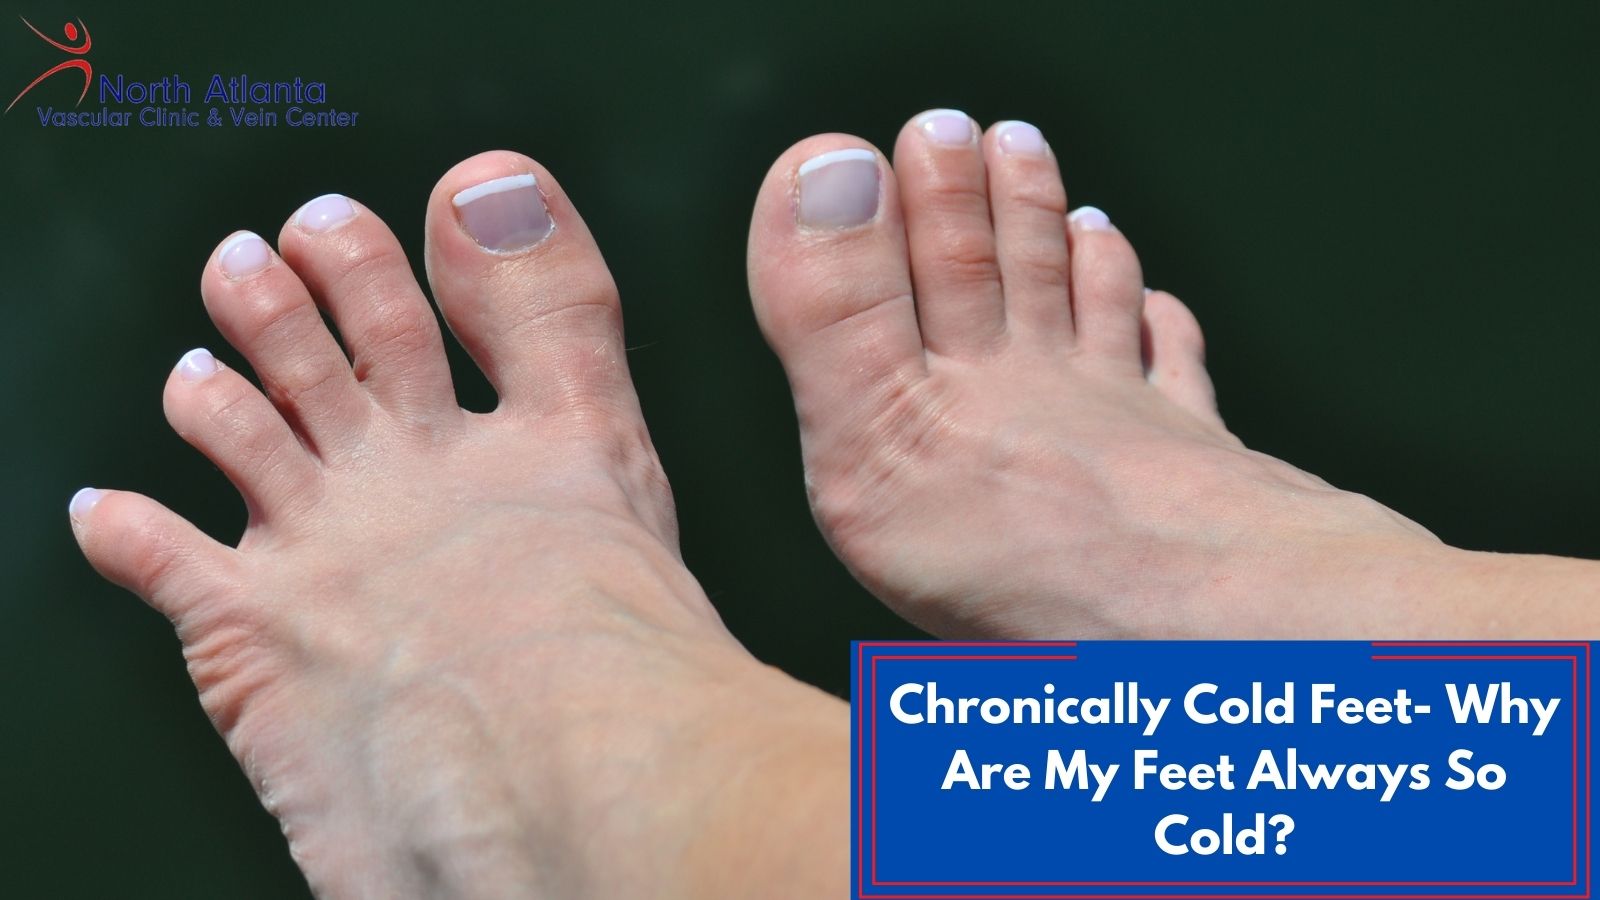 https://www.navascularclinic.com/blog/Uploads/chronically-cold-feet-why-are-my-feet-always-so-cold.jpg